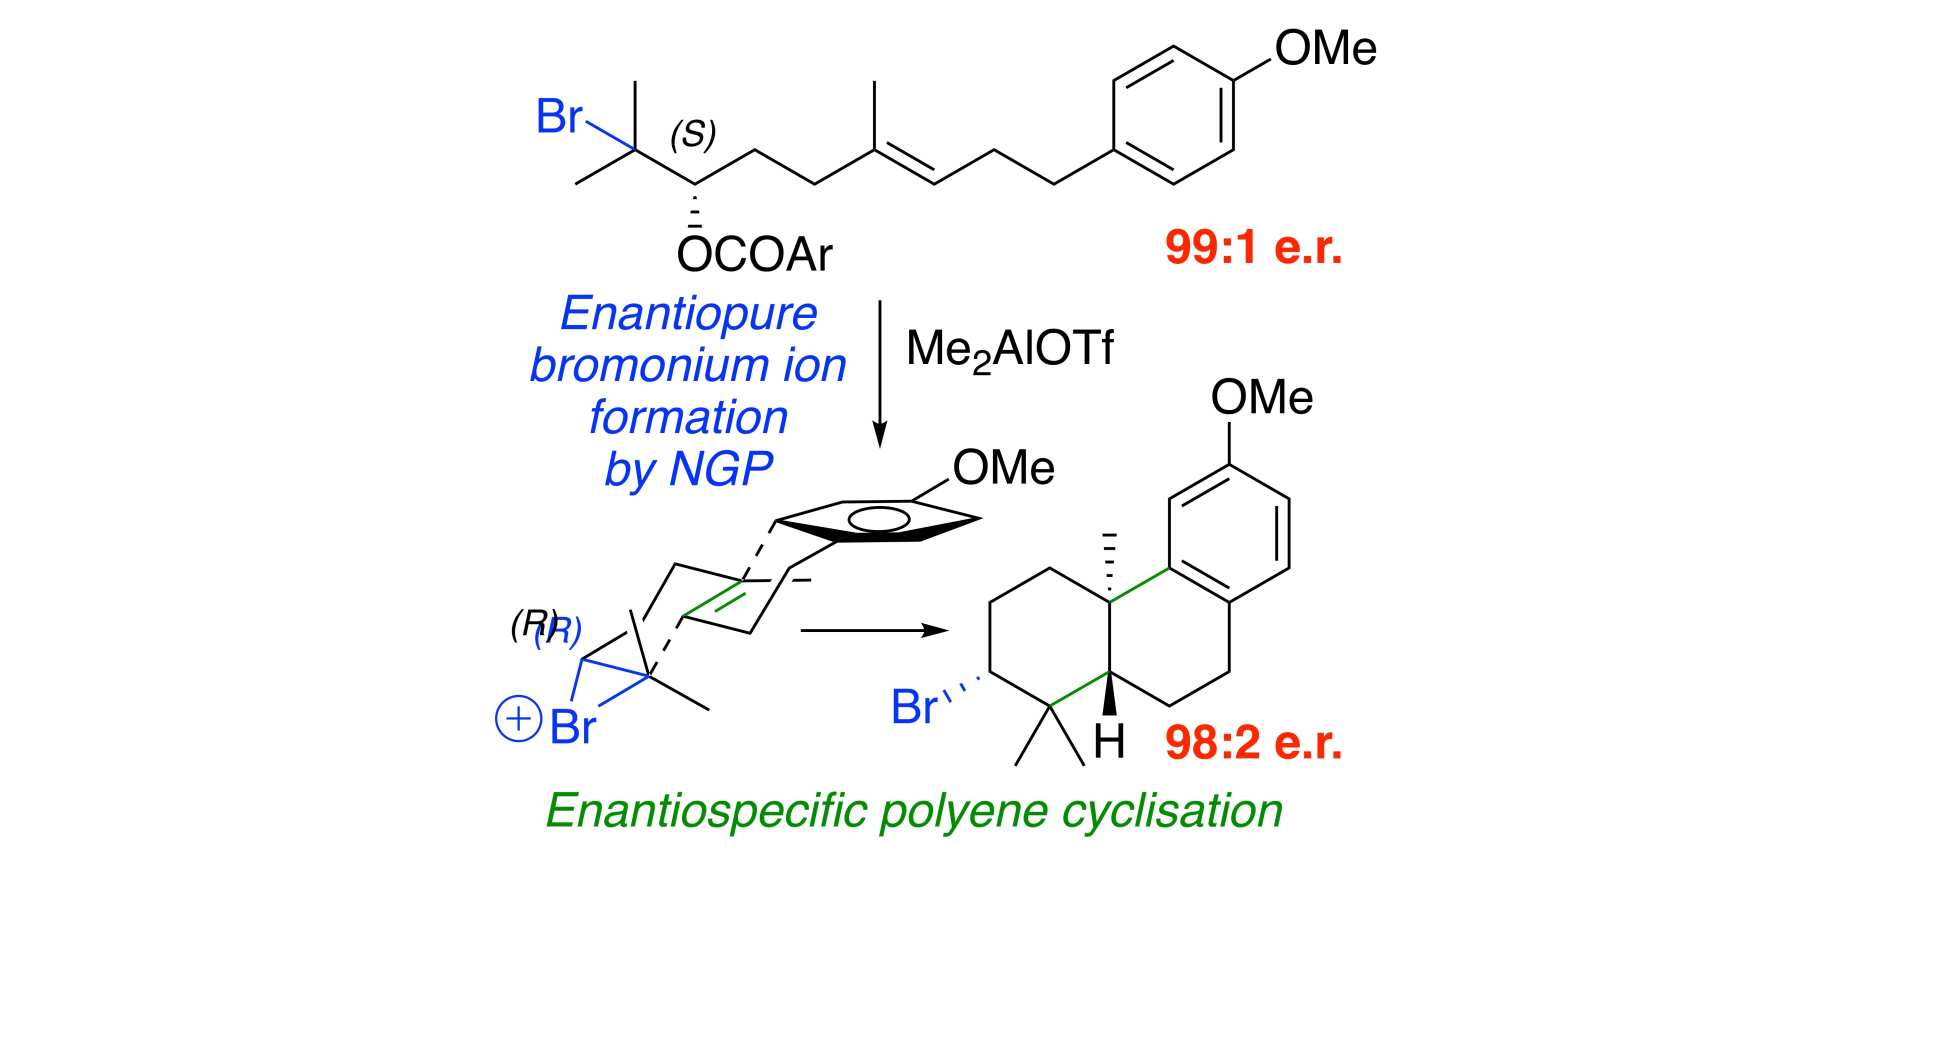 Summary scheme for paper: An Enantiospecific Polyene Cyclisation Initiated by an Enantiomerically Pure Bromonium Ion